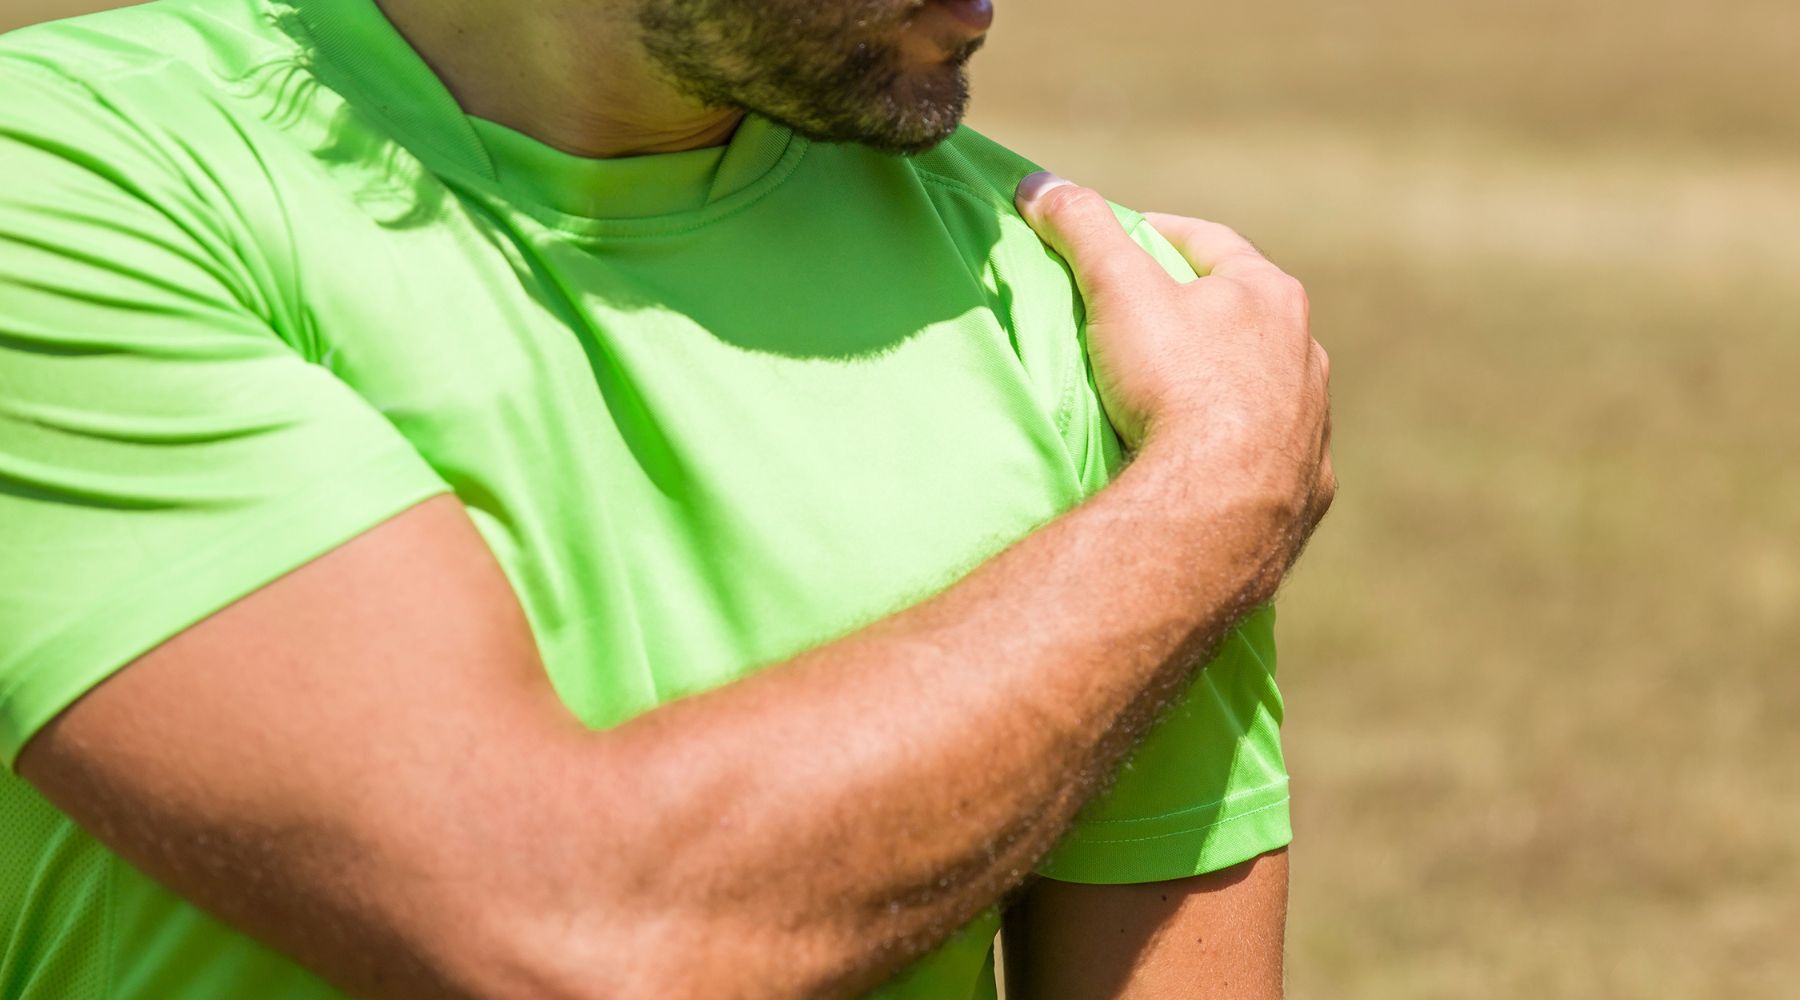 How Do You Stop Shoulder Pain From Ruining Your Game?